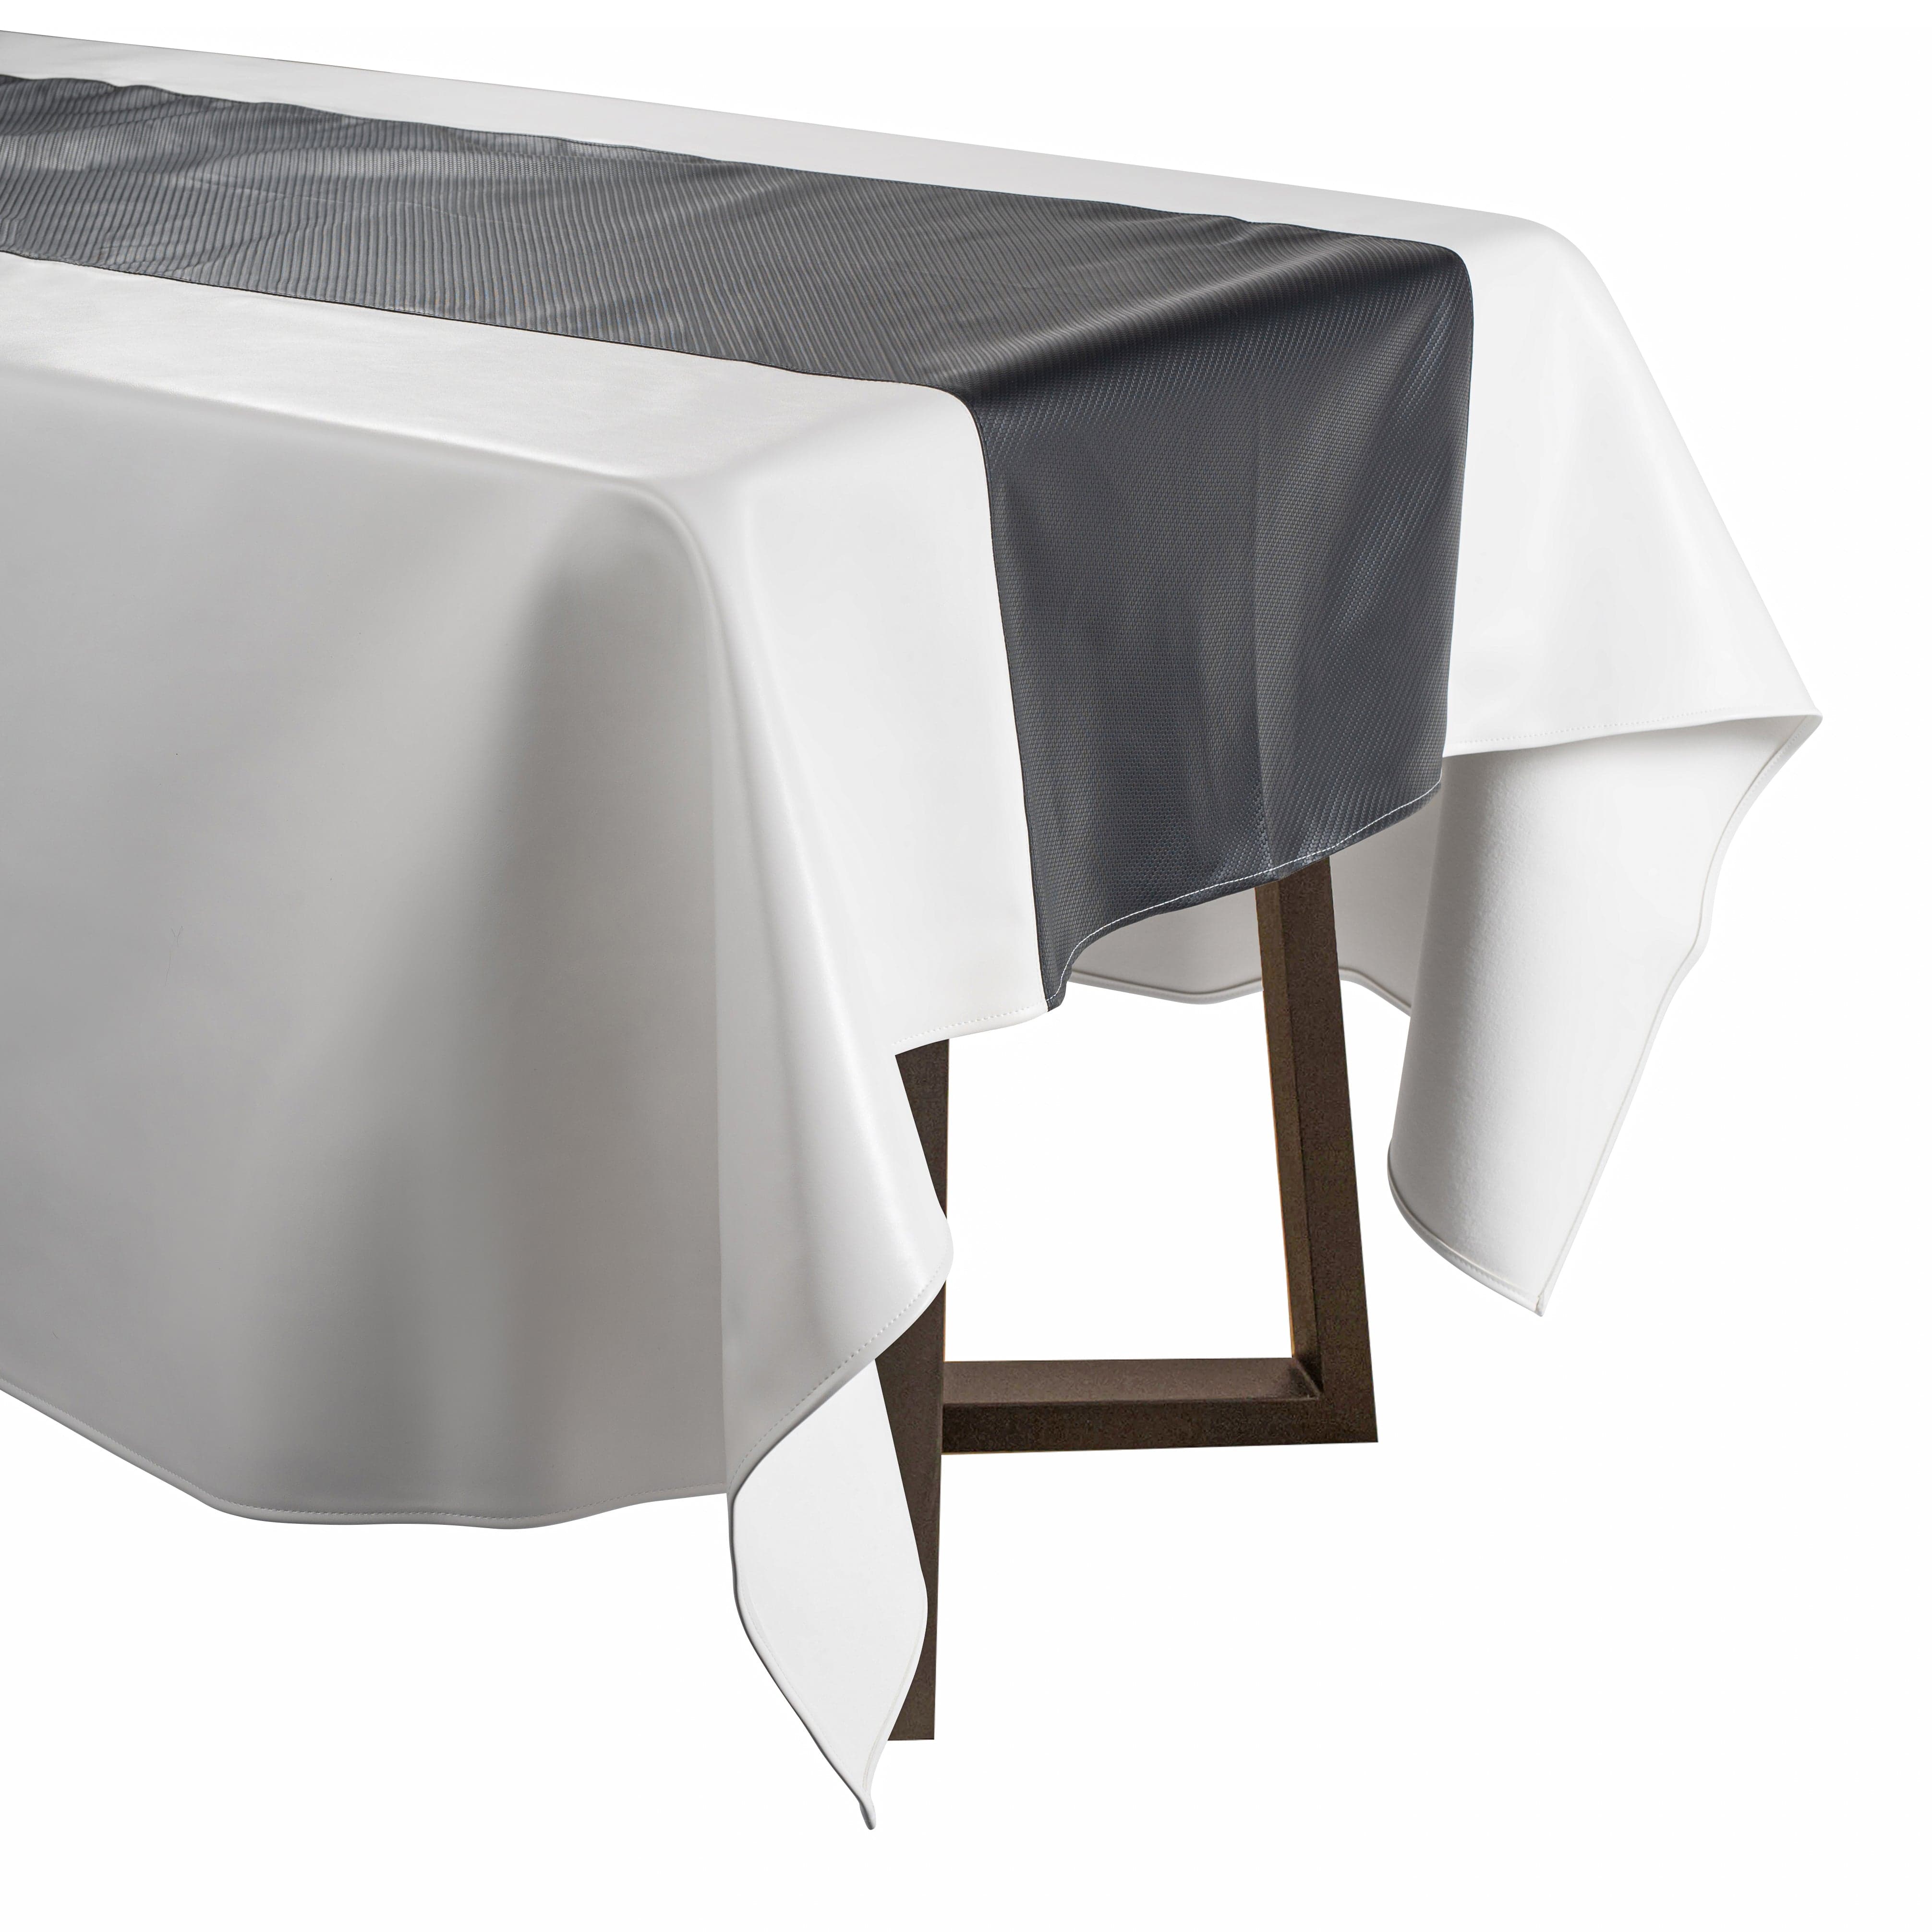 Tablecloth with Runner - Waterdale Collection